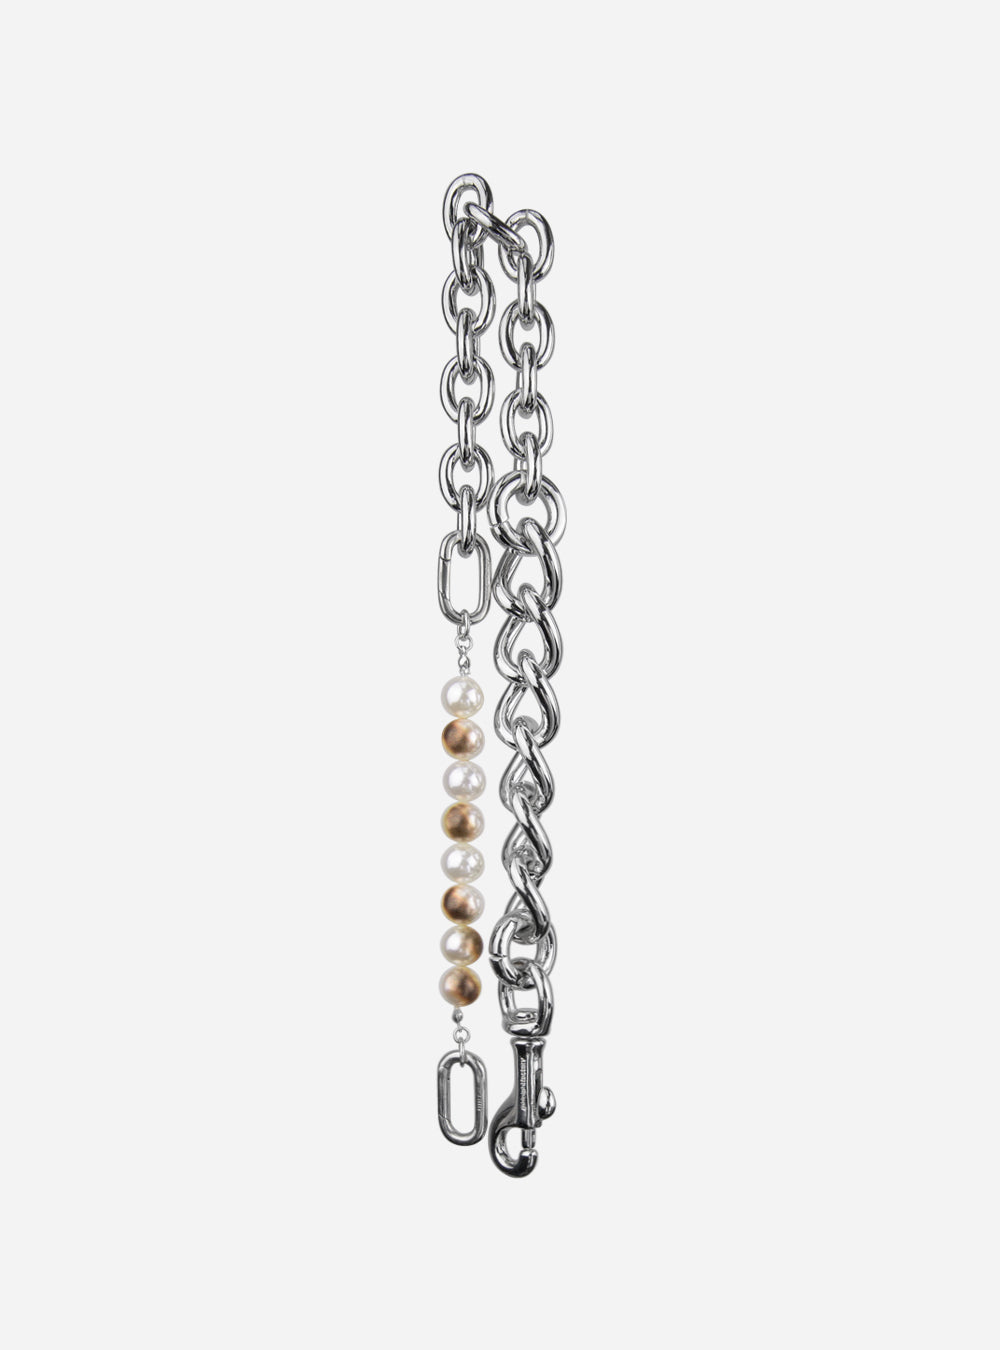 a MIDNIGHTFACTORY silver chain with Burnt pearls on it.